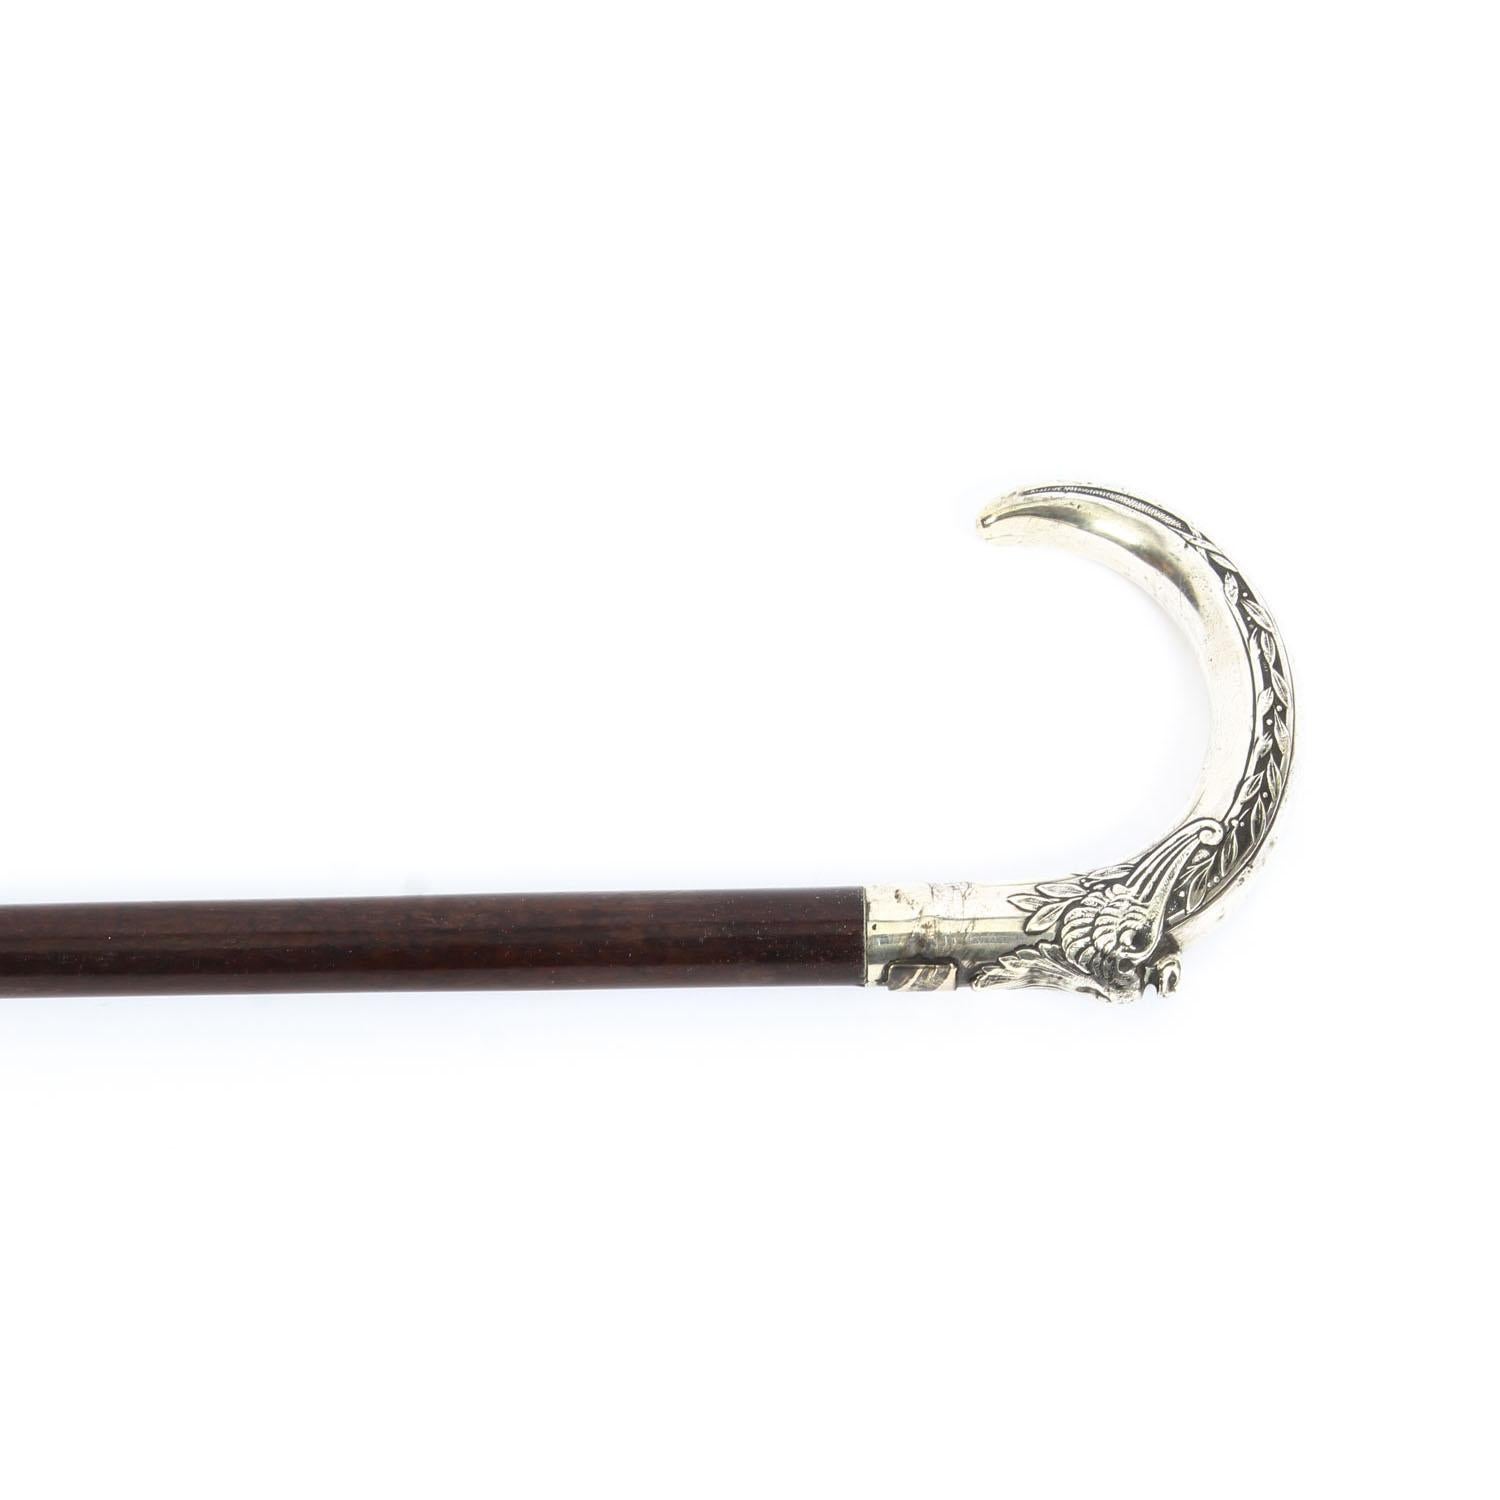 Late 19th Century Antique French Snakewood Walking Cane Stick Silver Eagle Handle, 19th Century